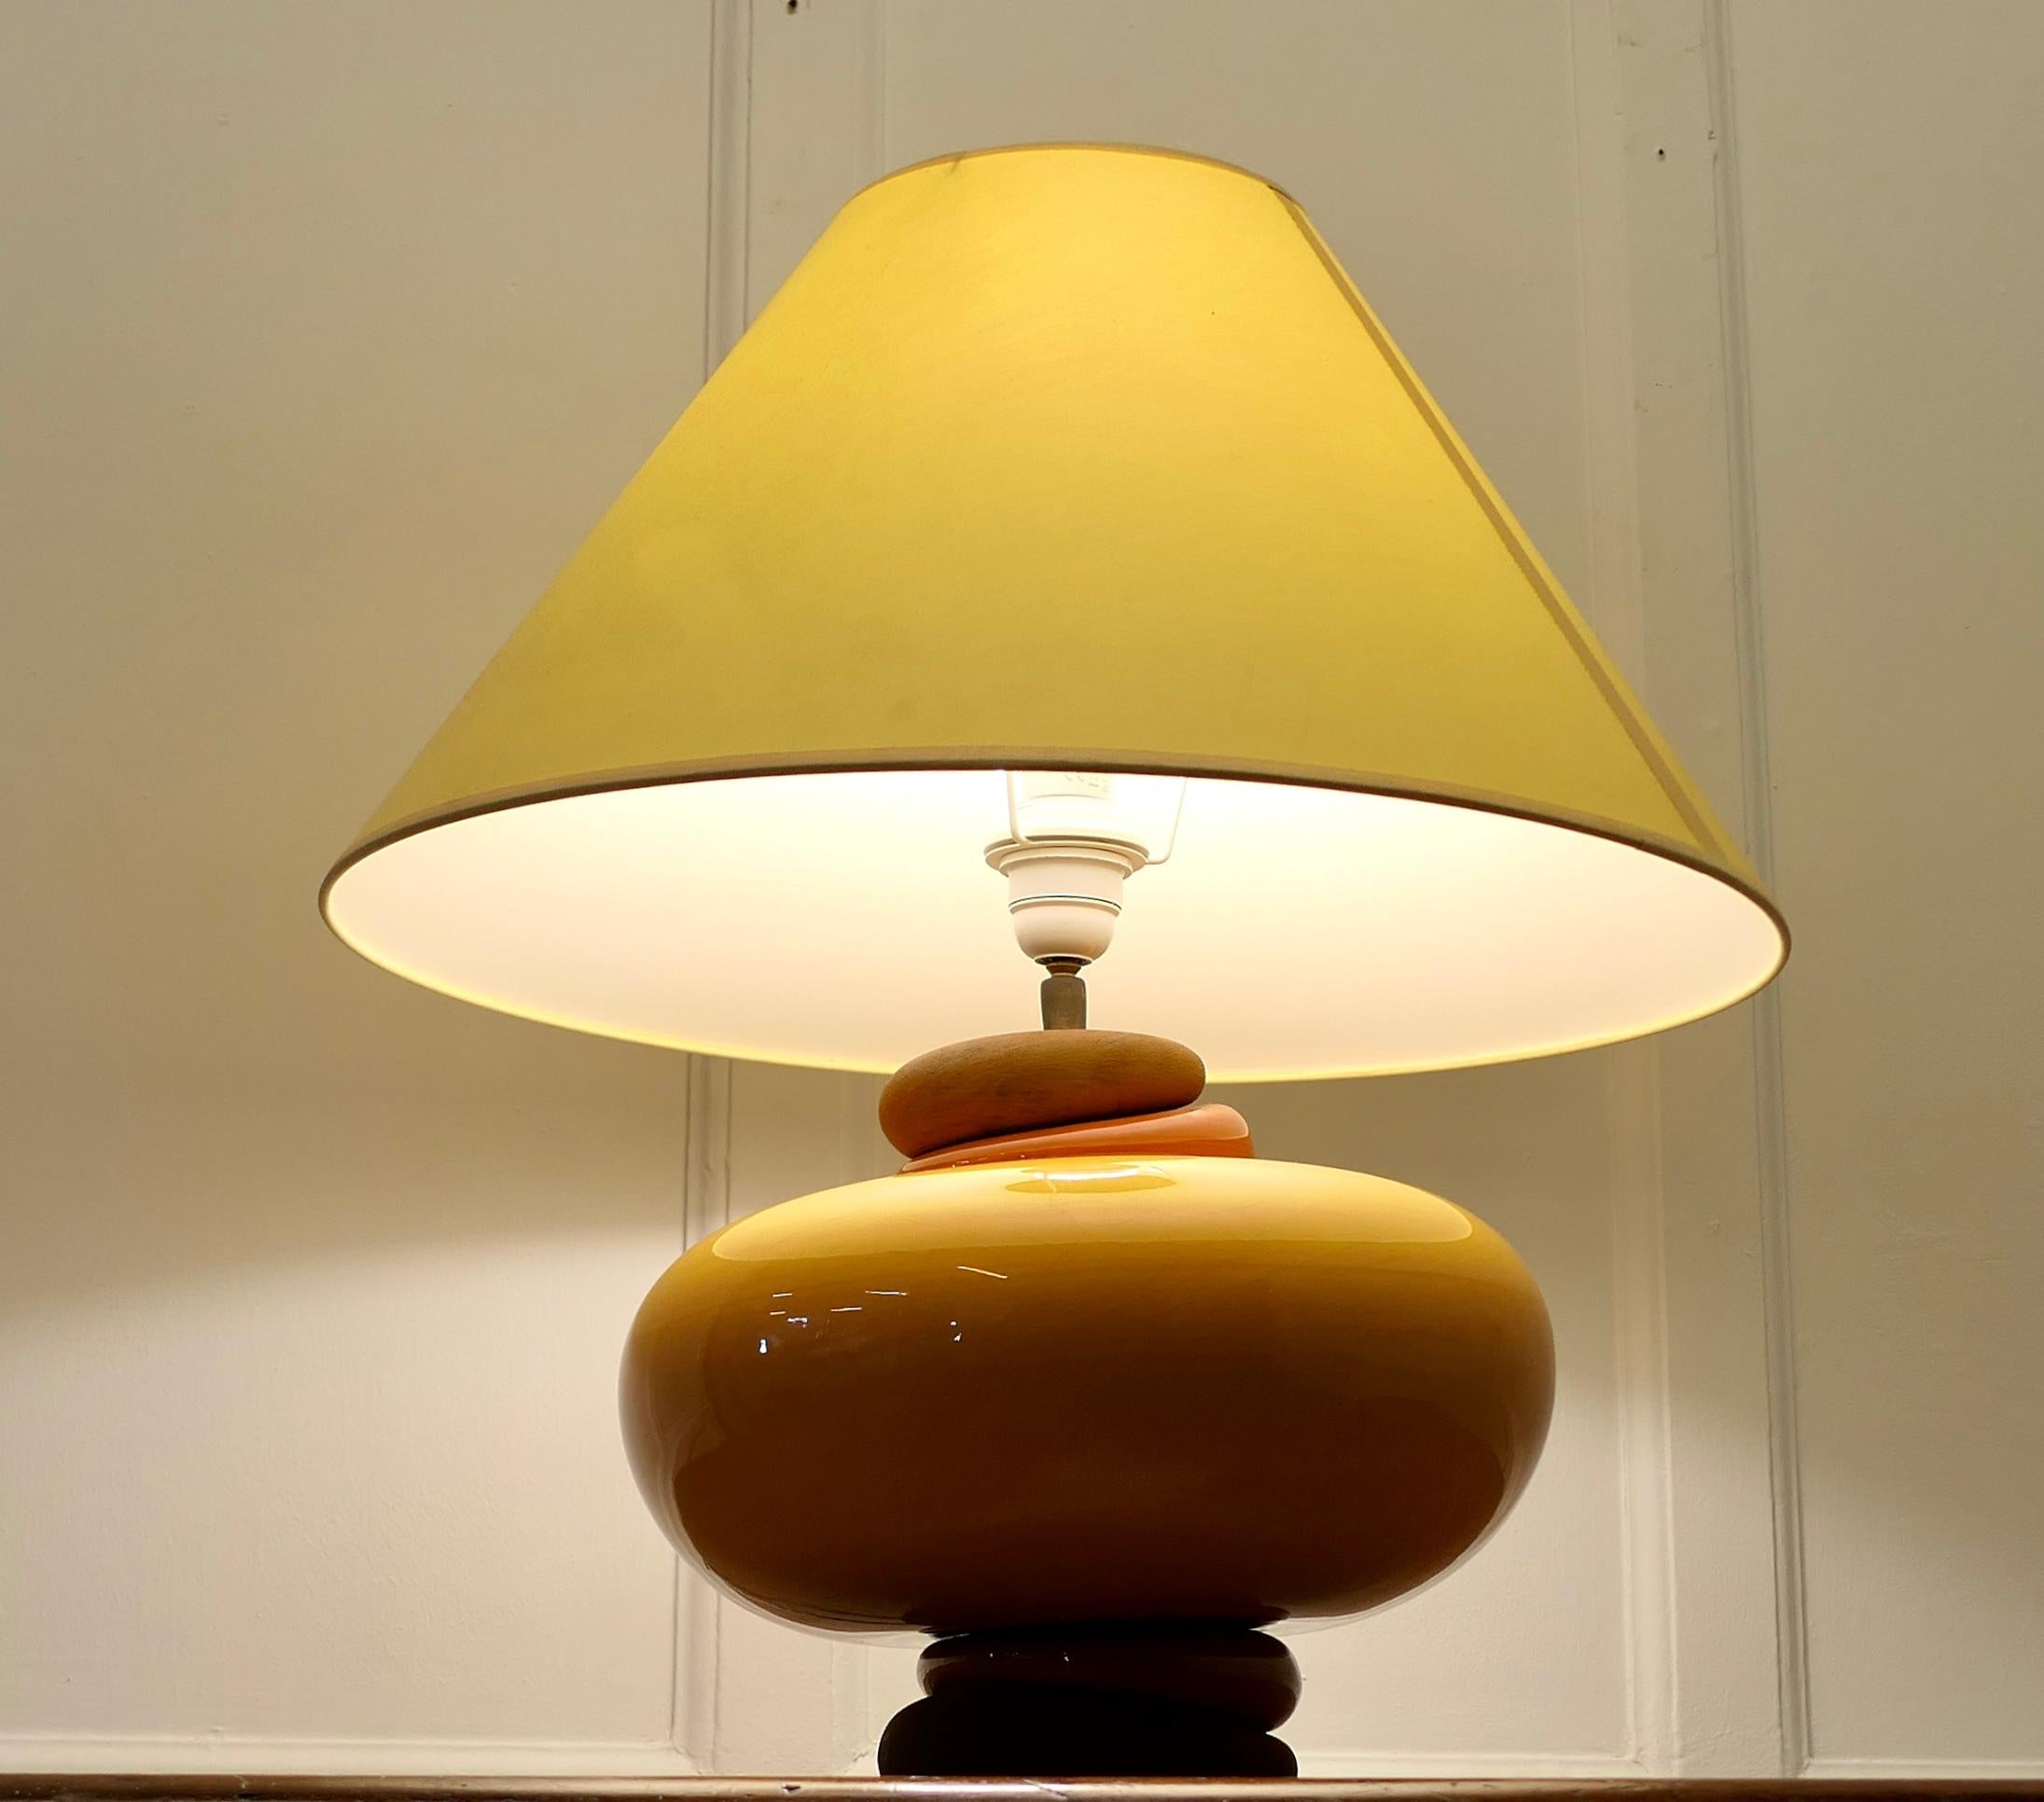 A Large Pebble and Rich Yellow Glass Sideboard Lamp

A Large French piece with layers of Glass and Pebble, the lamp is in bright Summer Colours and has a yellow Coolie Lampshade
All working and a great looker
The lamp is 22” tall, and 13” in